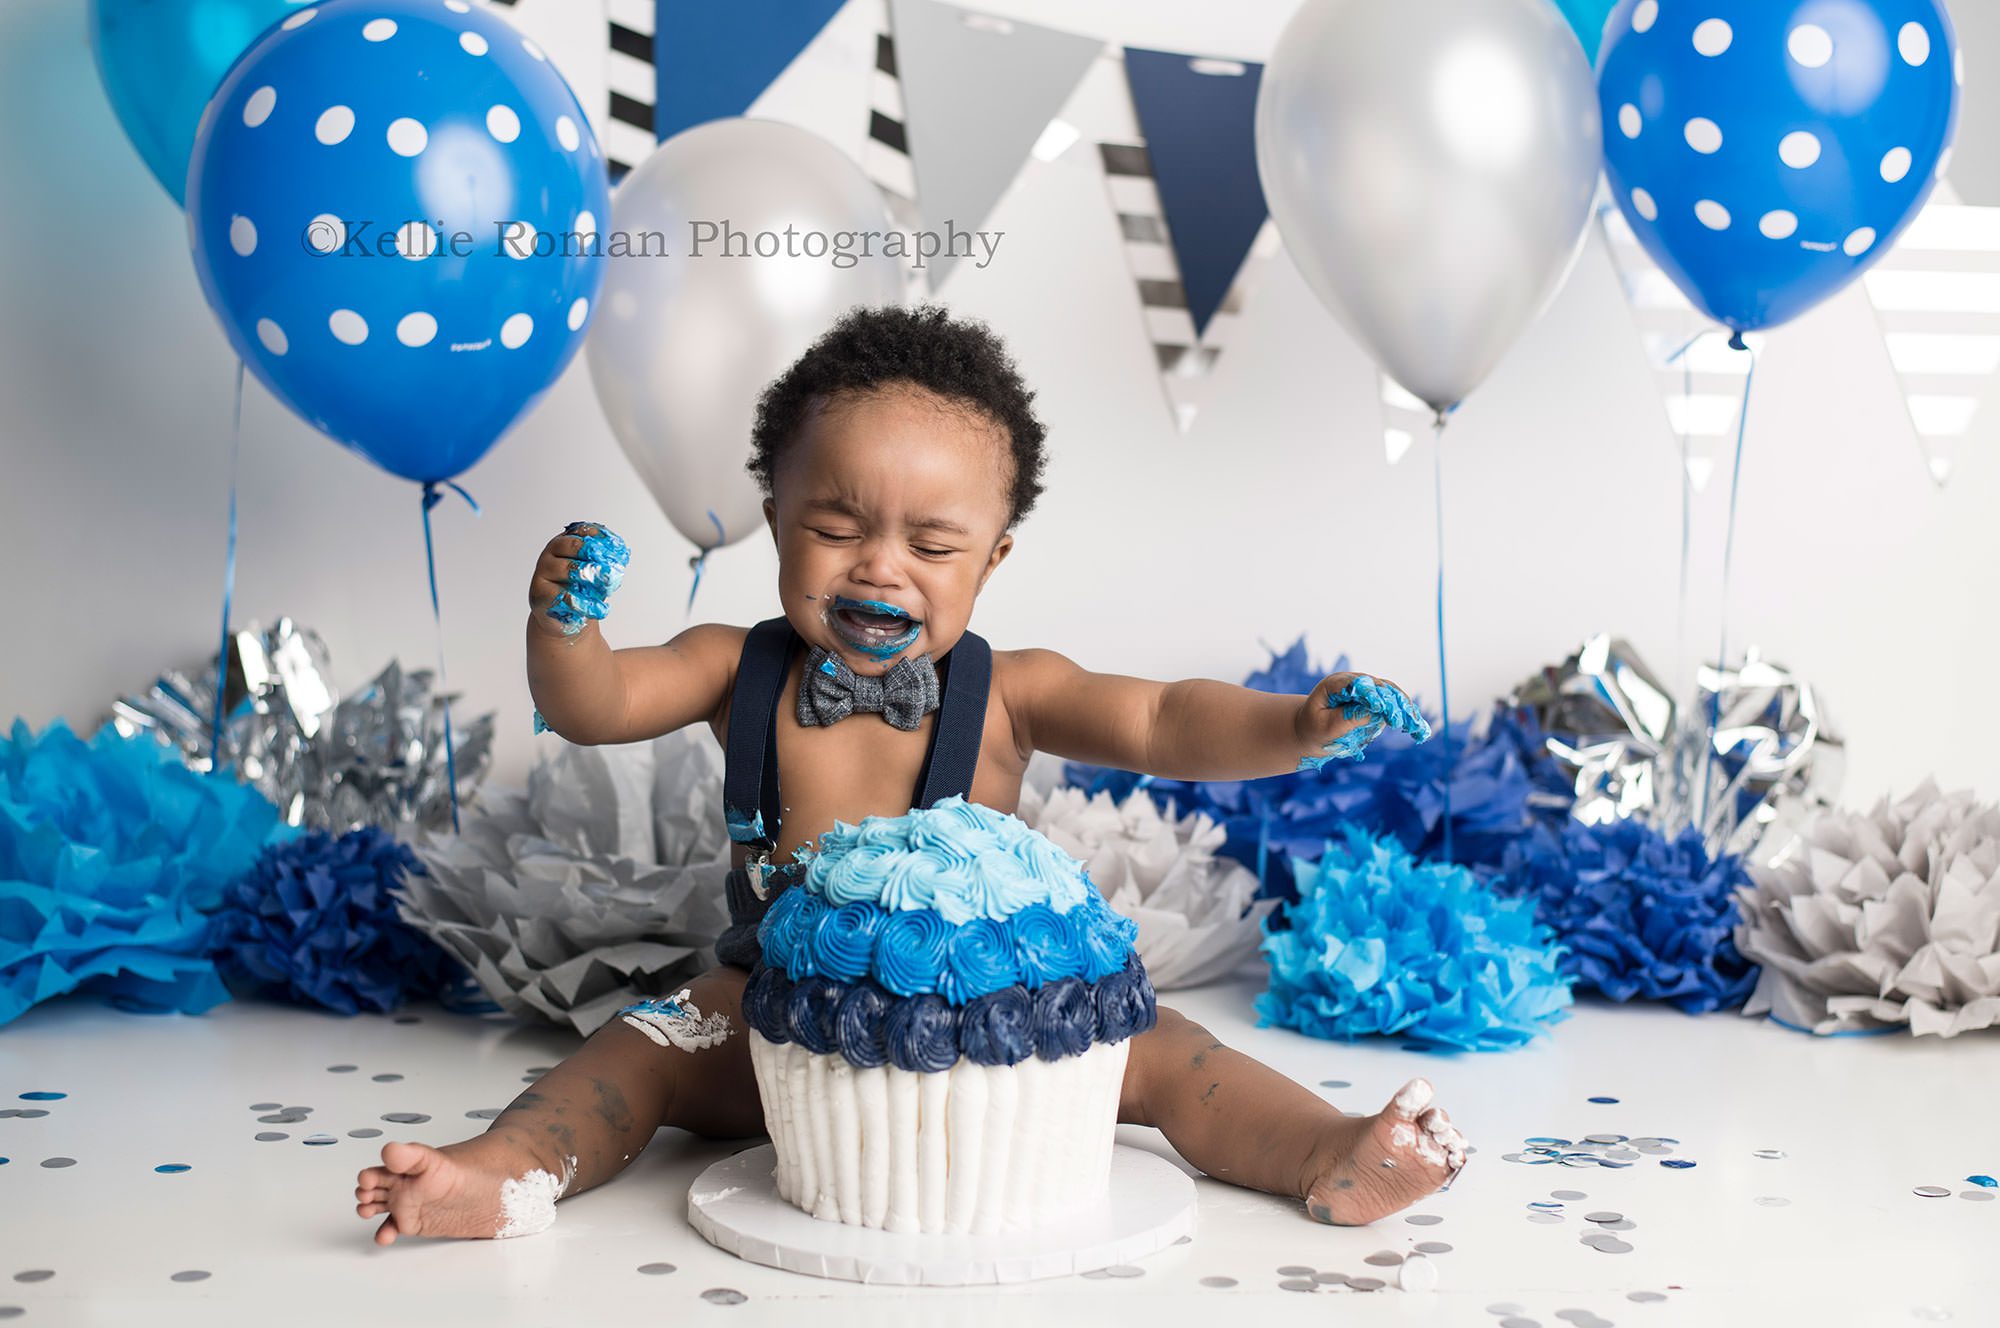 shades of blue cake smash one year old boy in Milwaukee Wisconsin photographers studio having pics taken wit ha blue and white large cake the backdrop is filled with shades of blue balloons and tissue paper pom poms. the boy is wearing blue suspenders and a bow tie and is crying with frosting on his feet and hands